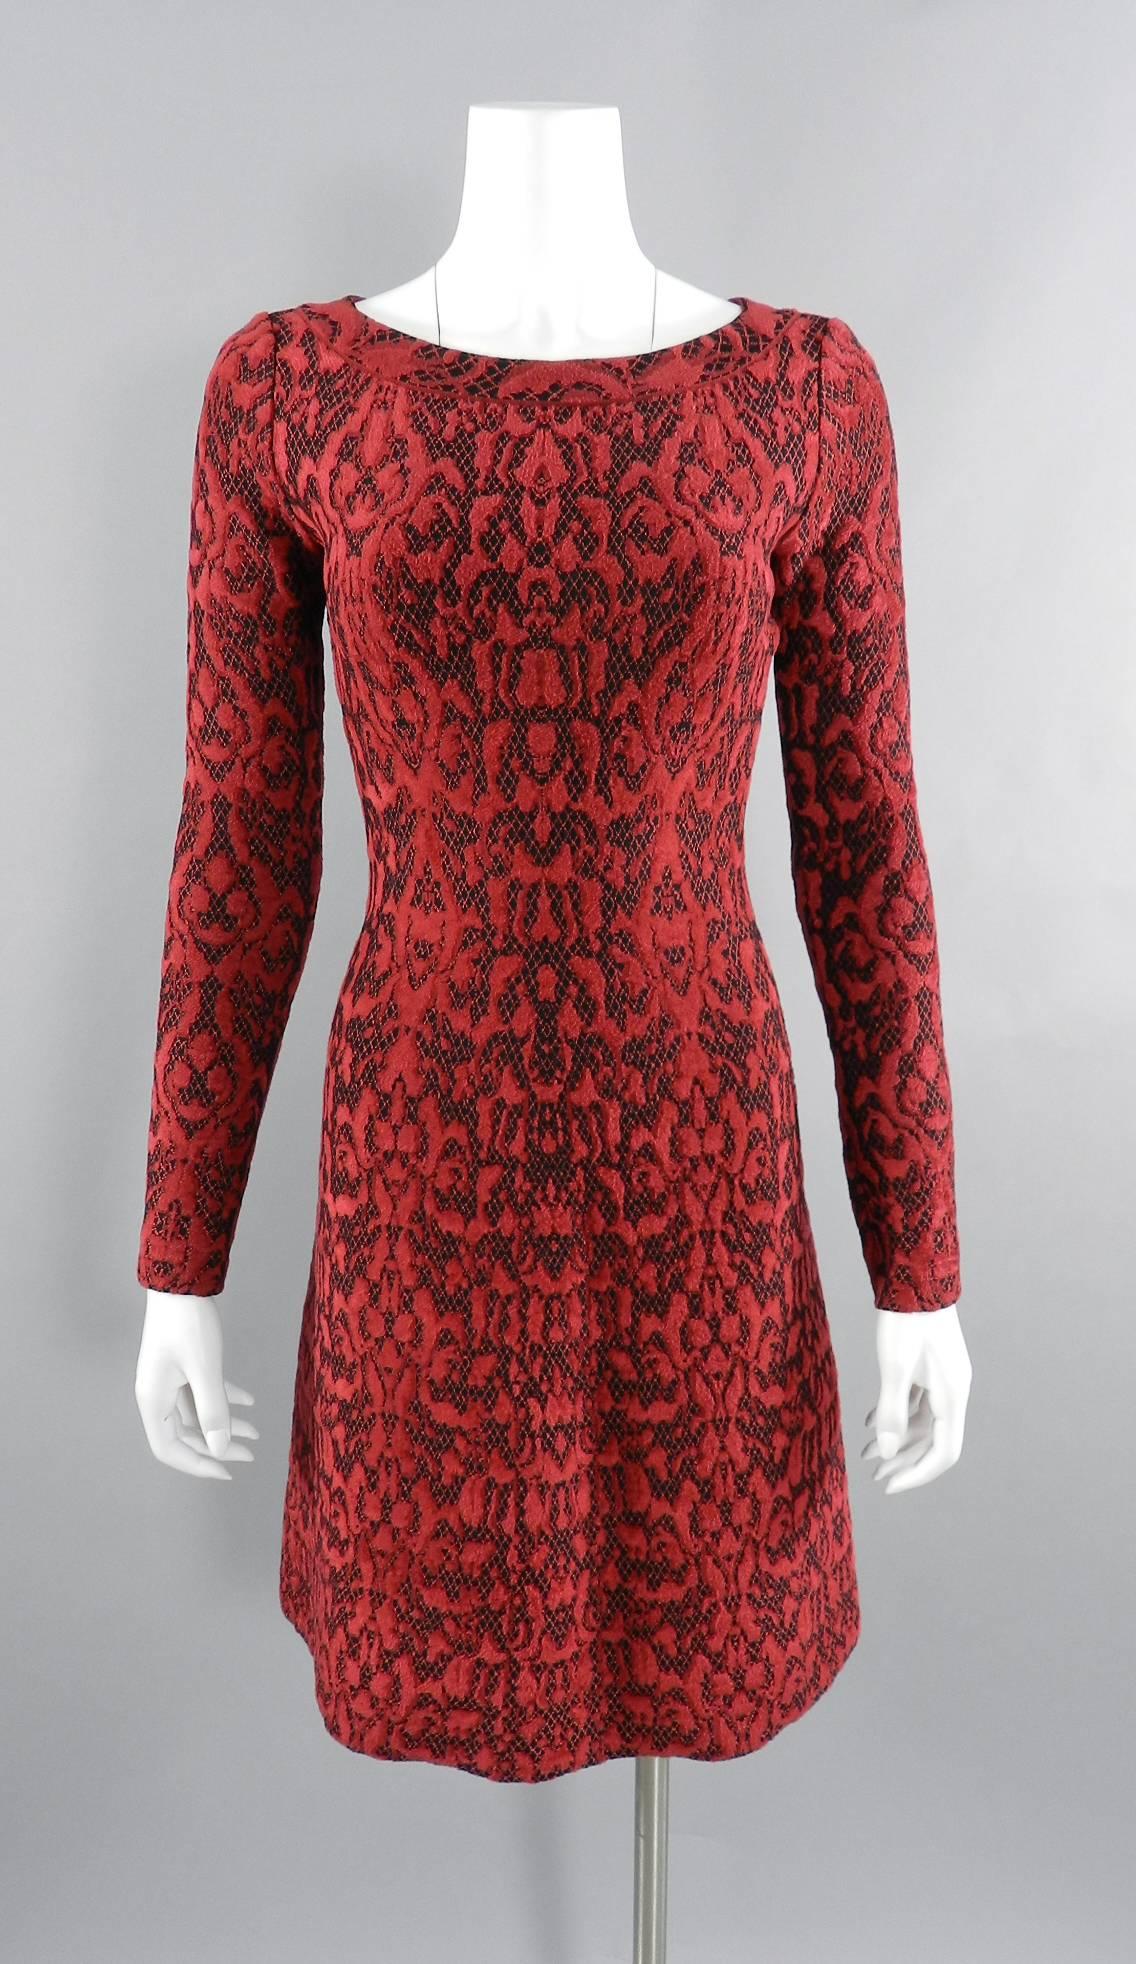 ALAIA Fall 2016 Red and black flocked Lace Overlay Cocktail Dress 5